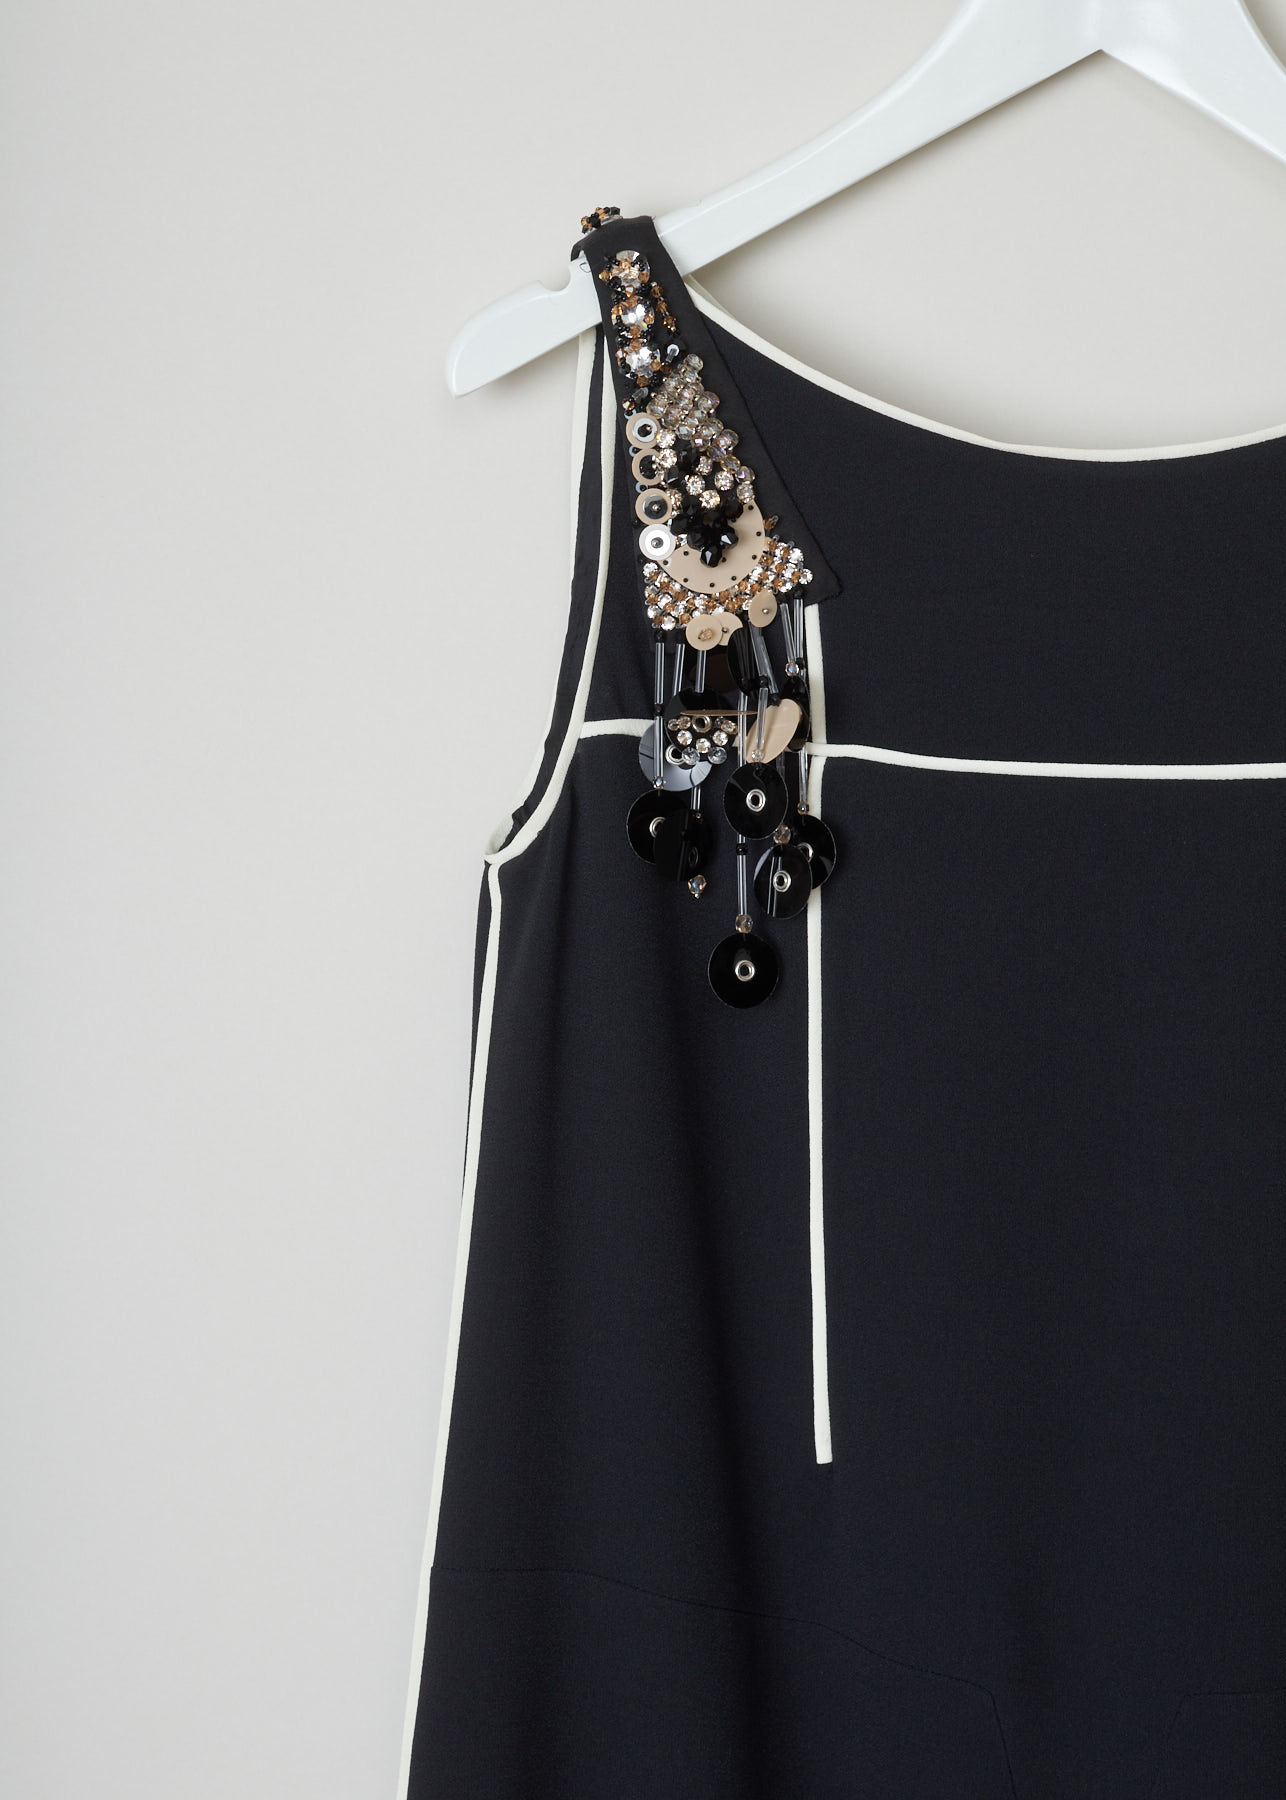 Prada, black beaded and sequined dress, SablePipingR_P33F7R_F0SJ2_NeroAvorioGRI, black, detail, black dress trimmed in white. beautiful beads,crystals and sequins on the shoulder. concealed zipper on the left side of the dress. pleated skirt which flares out. 